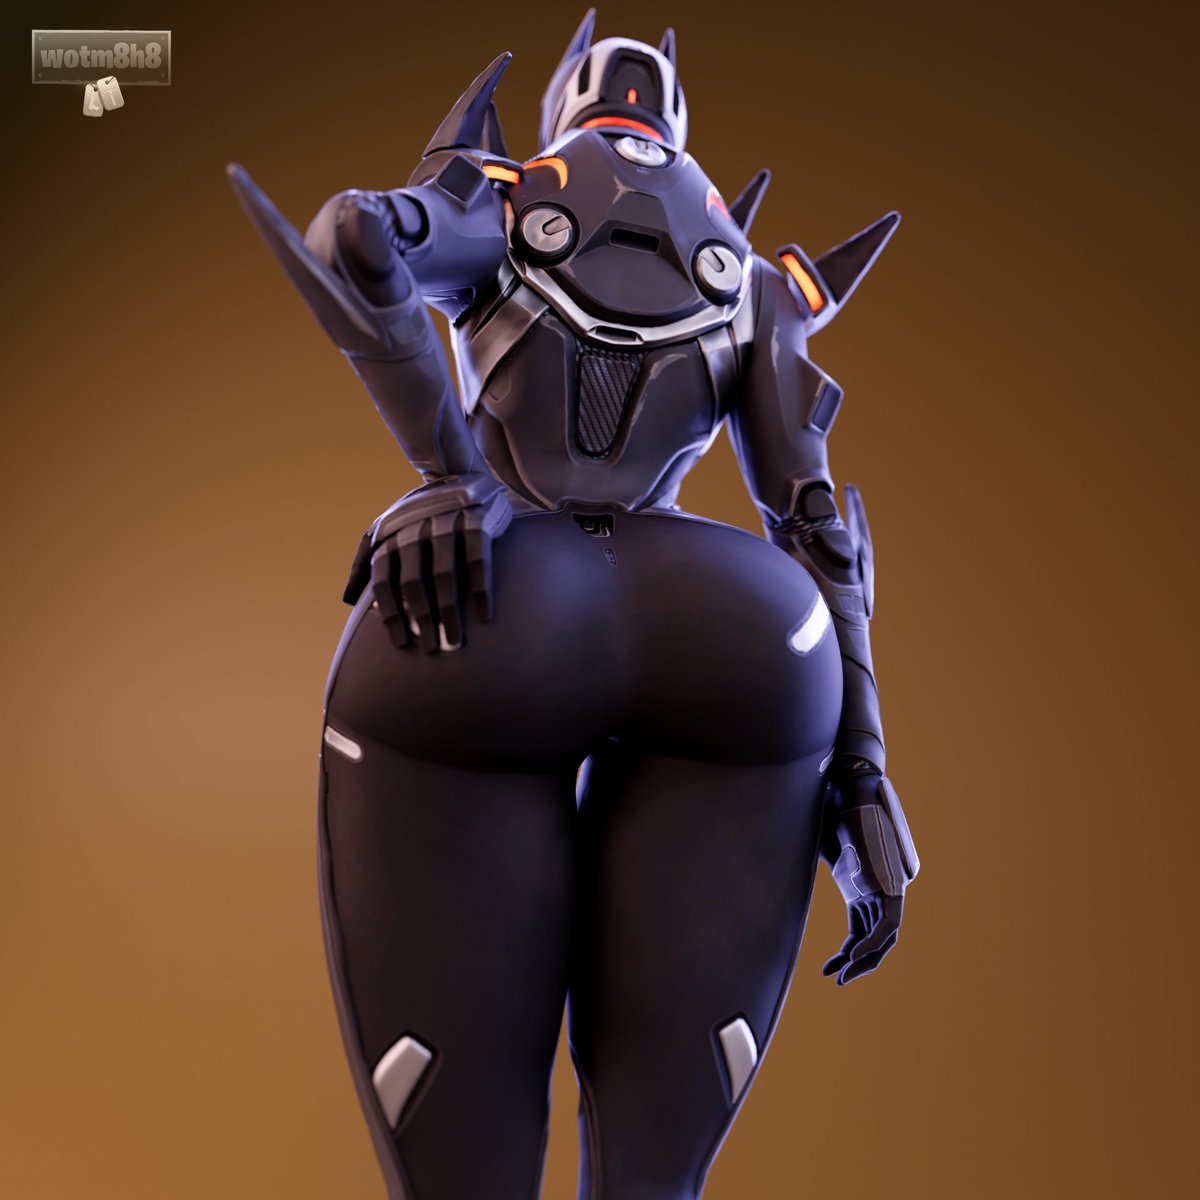 Wotm8h8 🇳🇿 on X: Oblivion Butt! Storm is coming soon folks, sorry for  the wait I've ran into some issues! Instagram: t.coGzW2nozc3a  Patreon: t.cor1LdtpDCBA #fortnite #fortnitensfw #r34  #oblivionfortnite #rule34 t.co ...